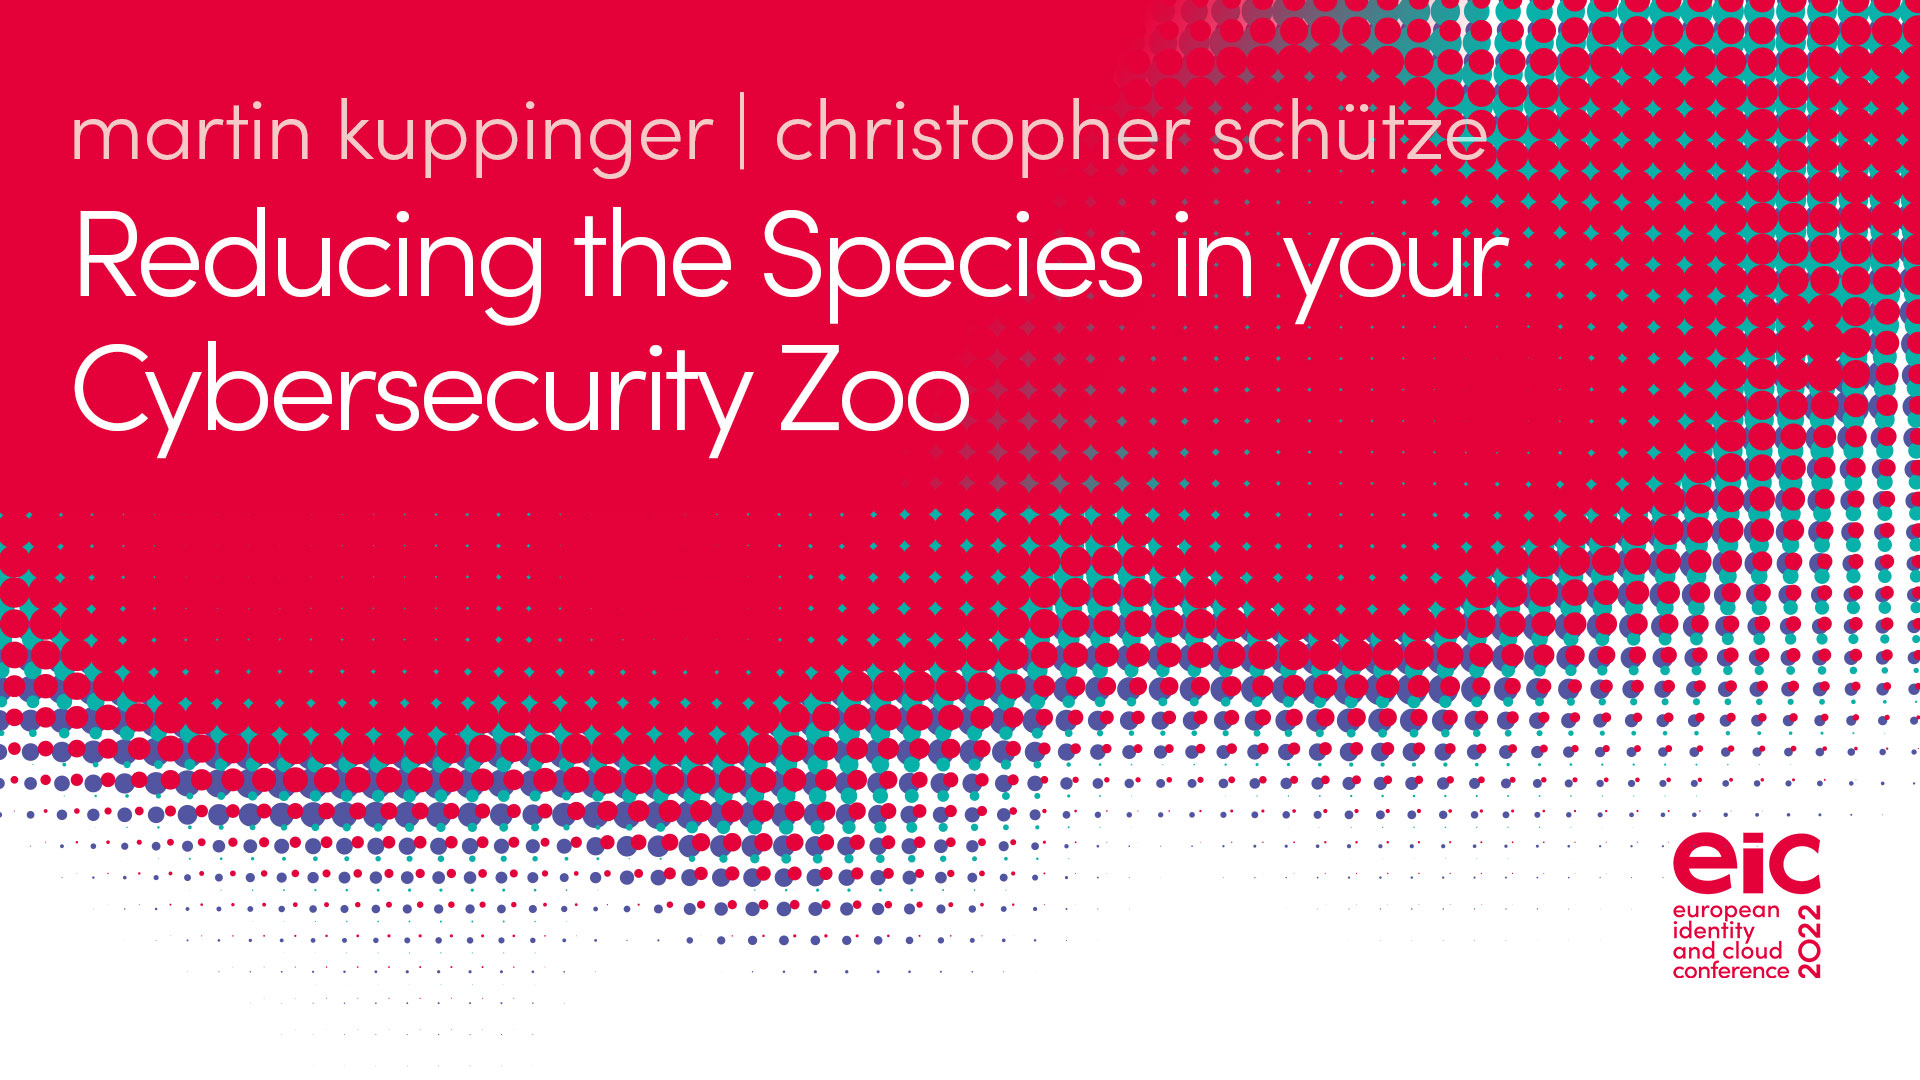 Reducing the Species in your Cybersecurity Zoo